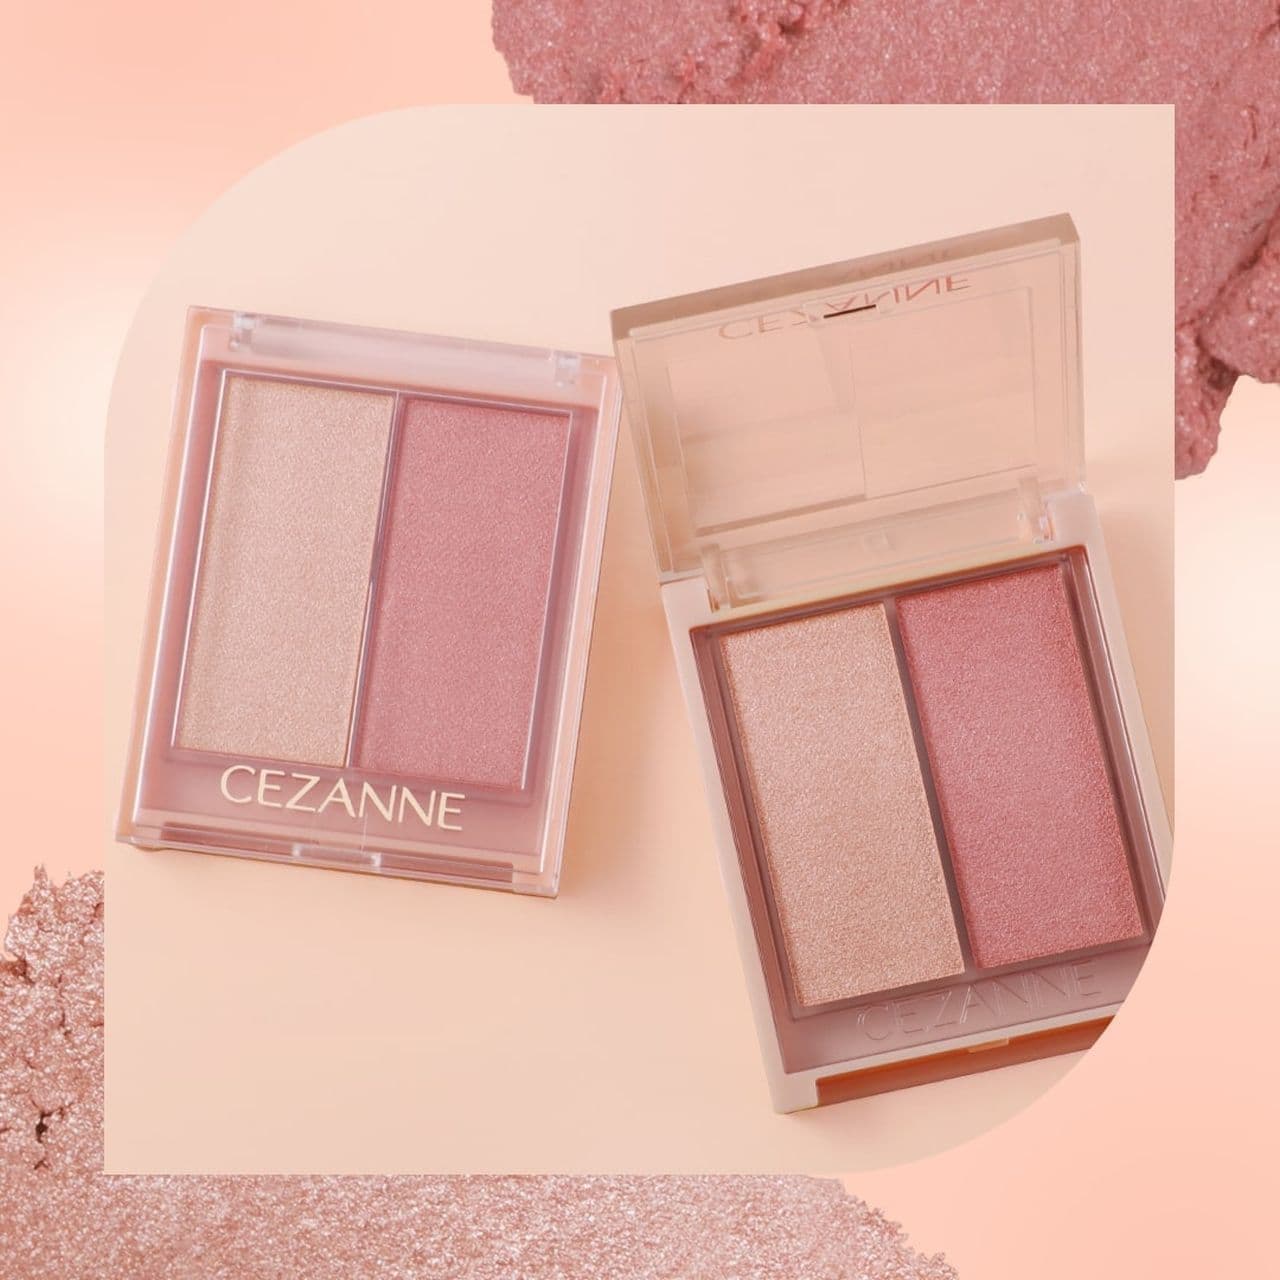 Sezanne Cosmetics "Face Glow Color" new color "02 Rose Glow